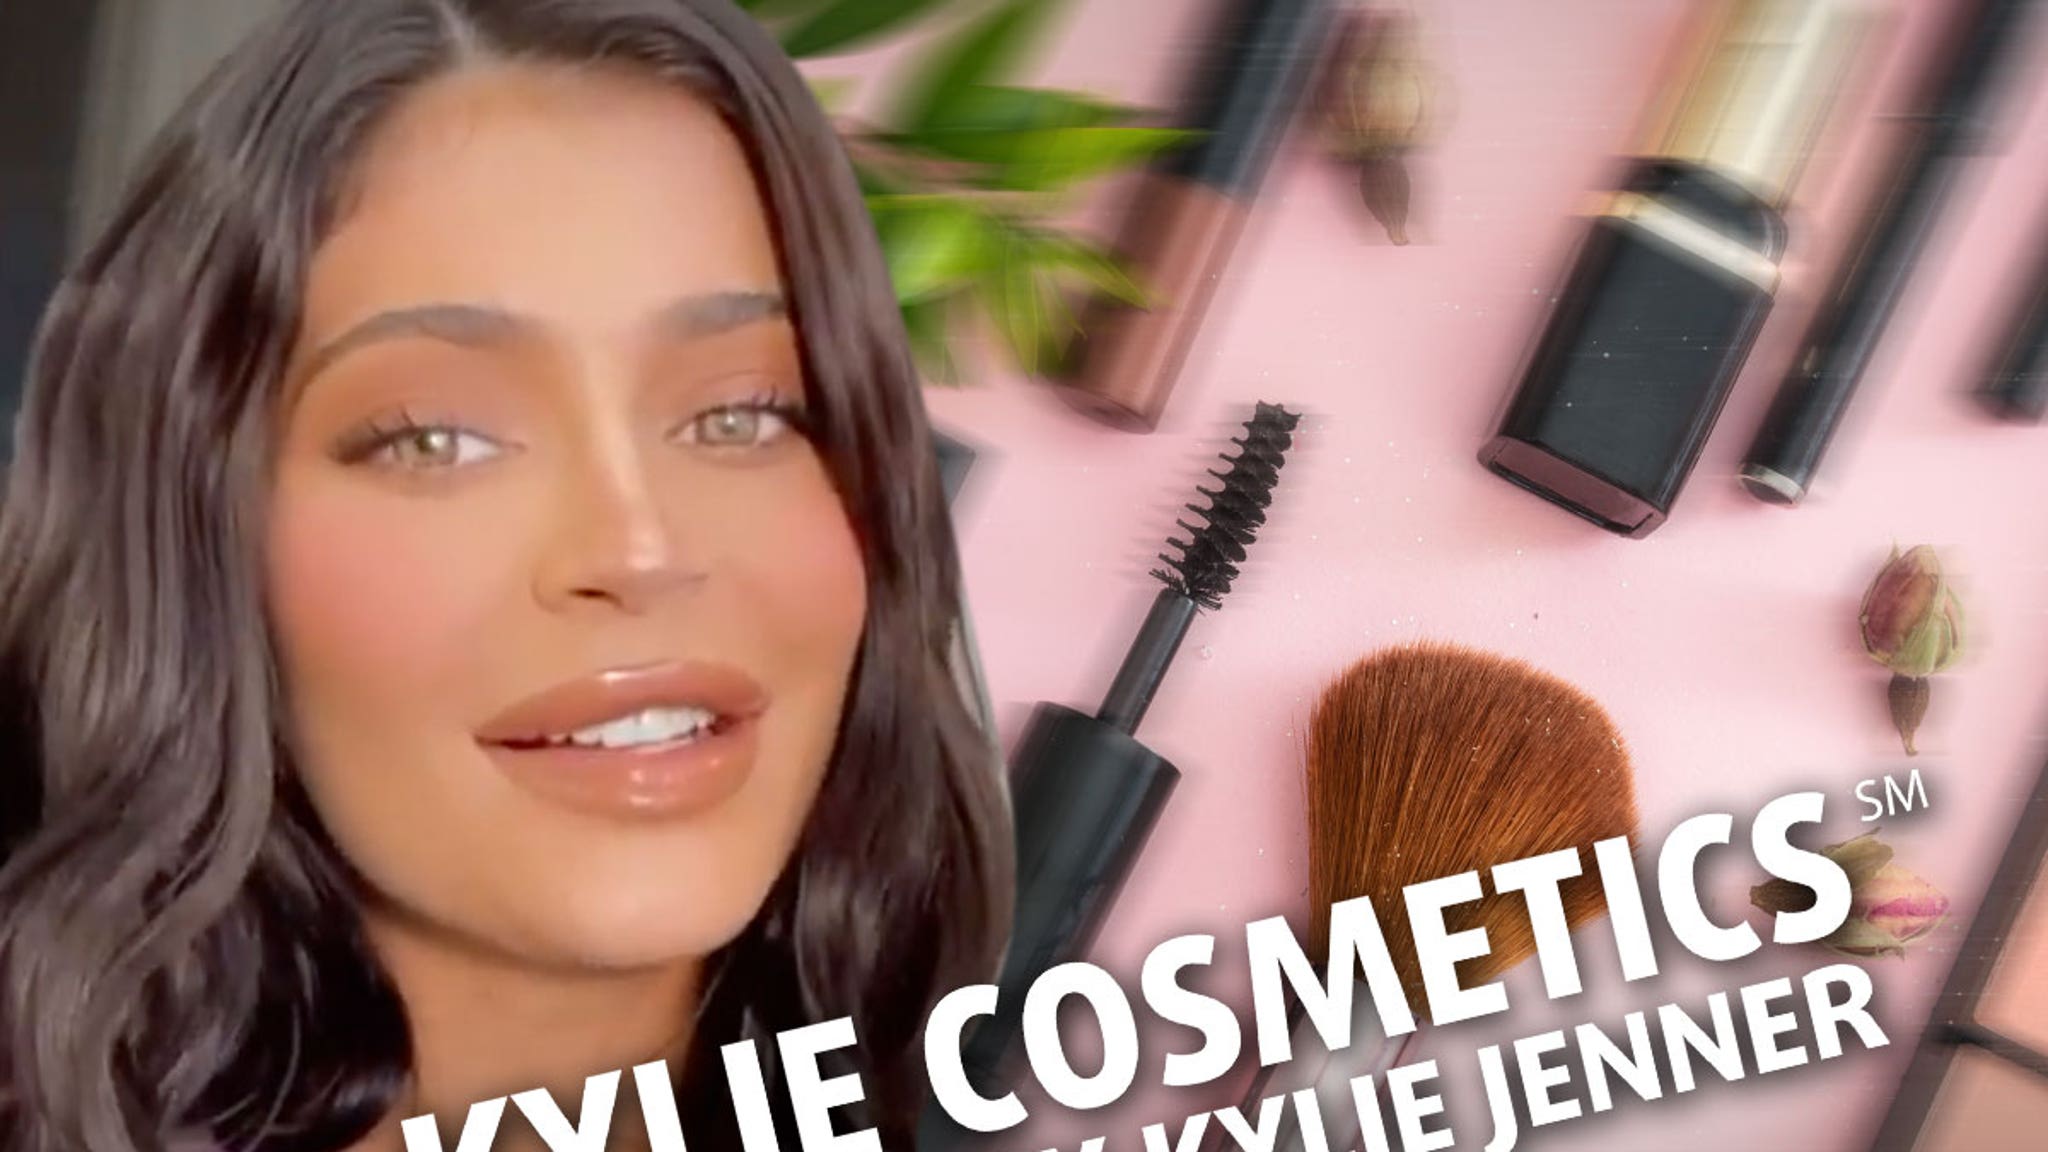 Kylie Jenner Looks to Extend Makeup Line with Beauty Products for Eyes thumbnail